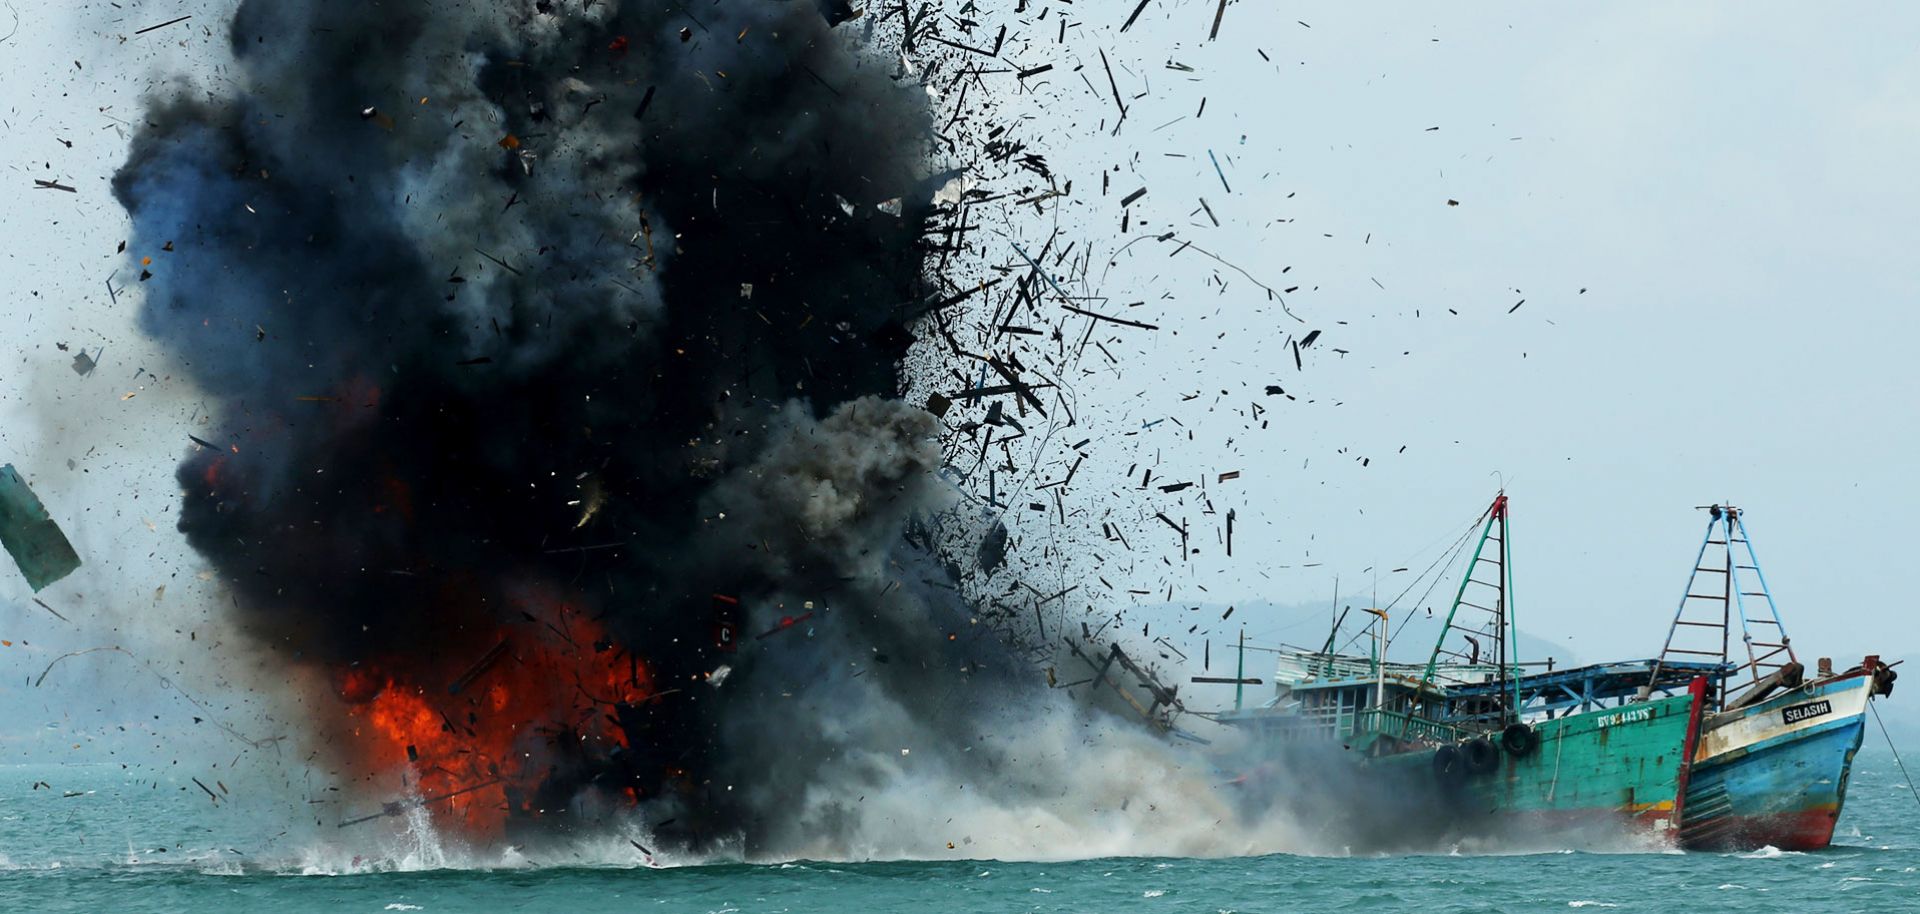 The Indonesian government blows up a foreign fishing vessel in its waters earlier this year. 